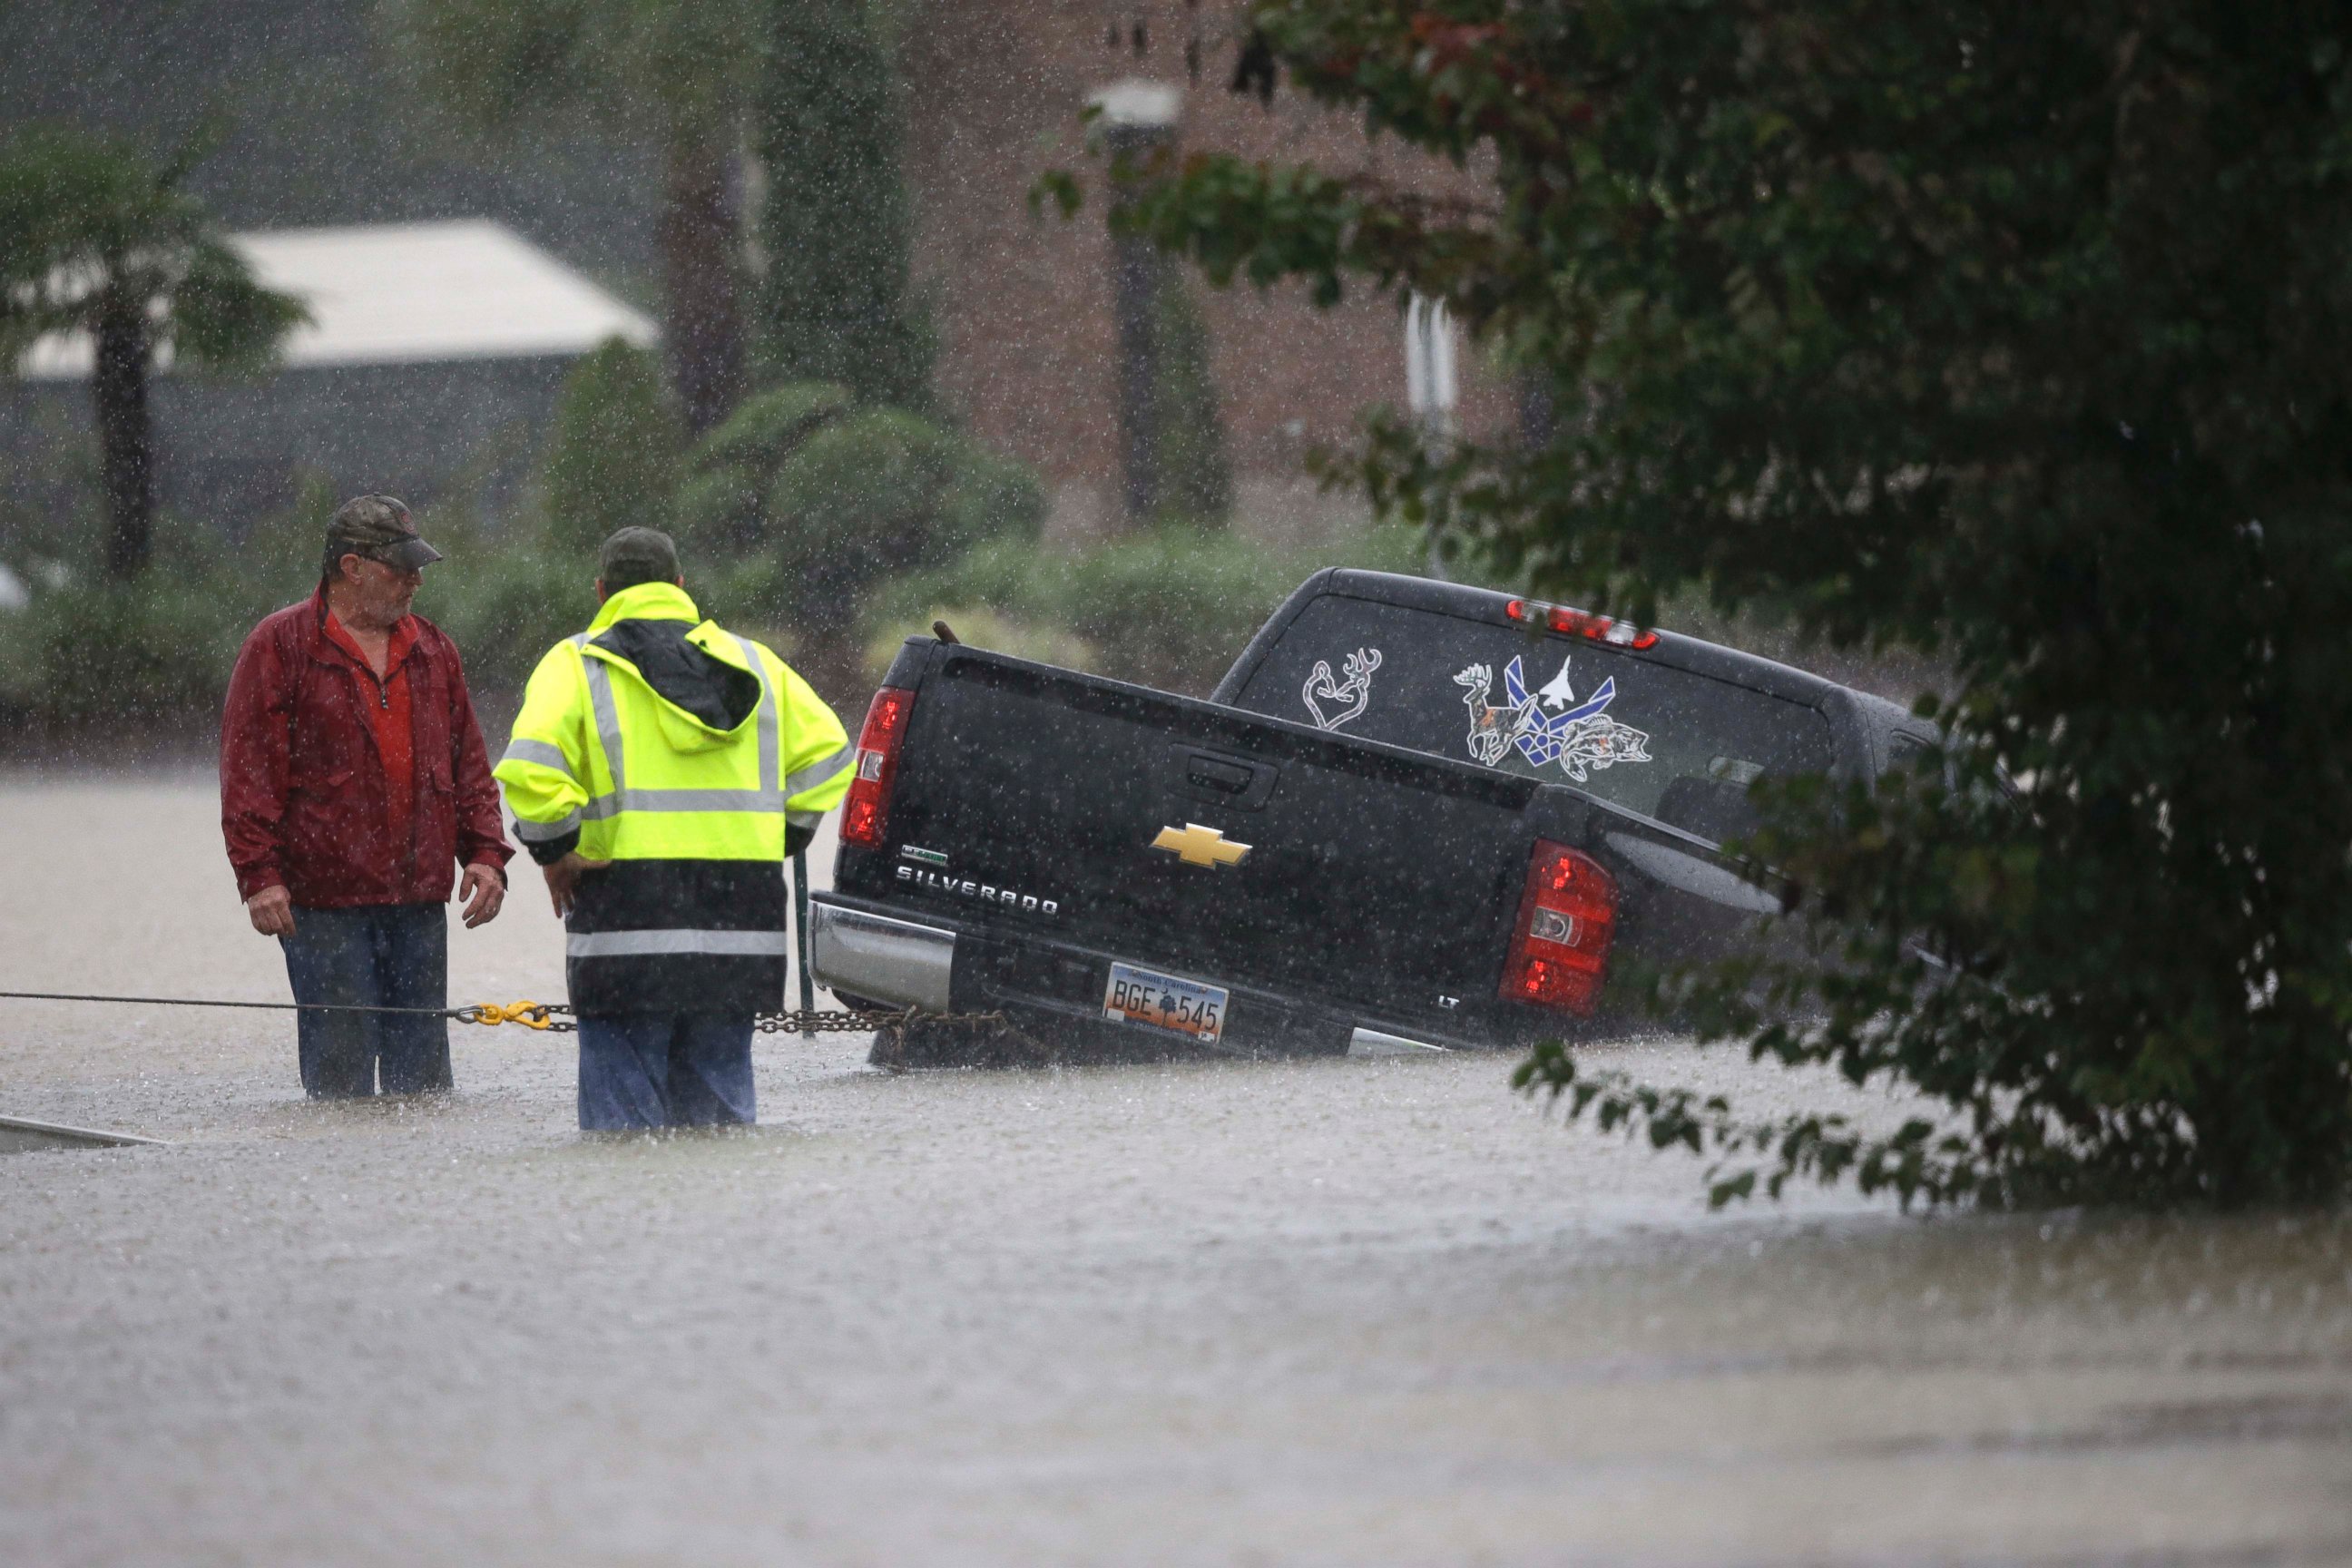 PHOTO: A tow-truck operator assists a stranded motorist during flash flooding in Florence, S.C.,  Oct. 4, 2015, as heavy rain continues to cause widespread flooding in the state.